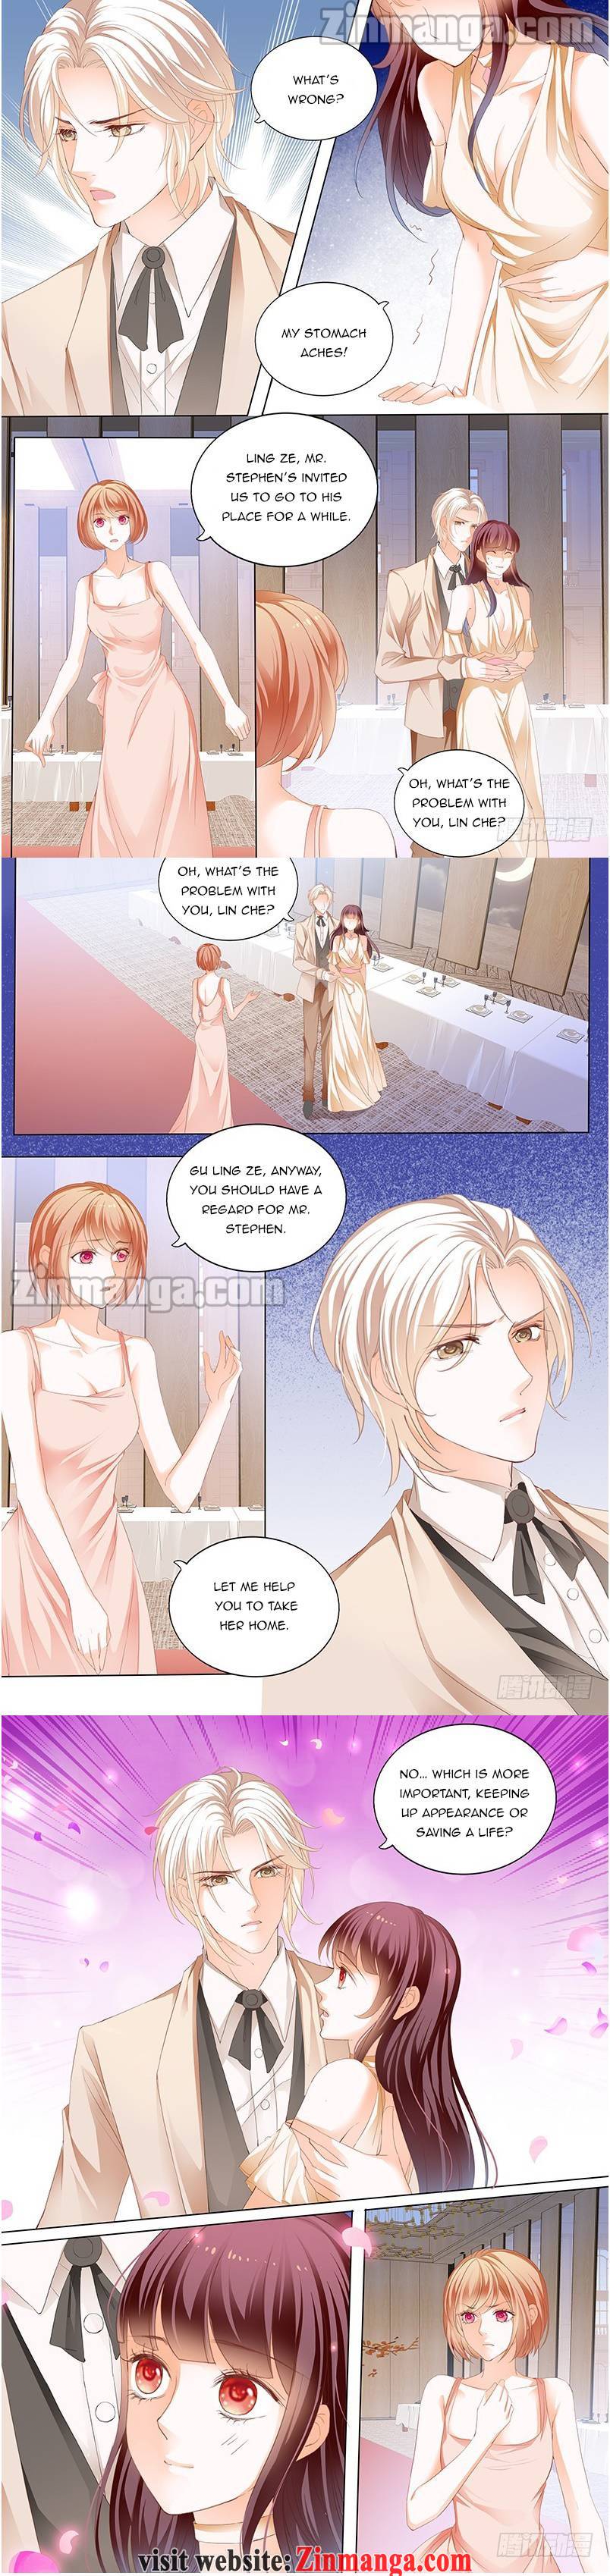 THE BEAUTIFUL WIFE OF THE WHIRLWIND MARRIAGE chapter 178 - page 4